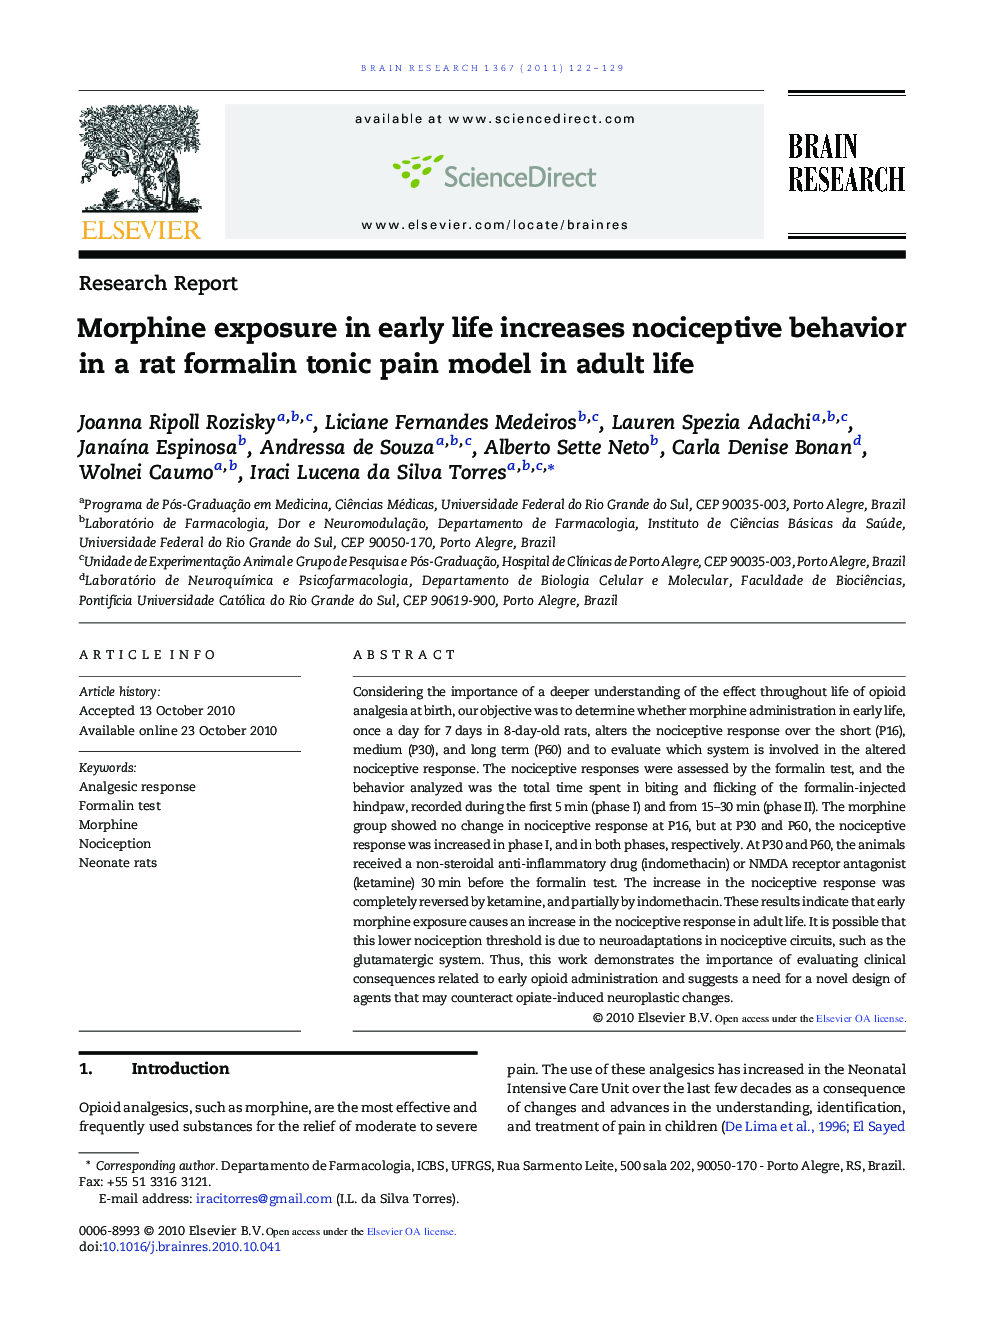 Research ReportMorphine exposure in early life increases nociceptive behavior in a rat formalin tonic pain model in adult life